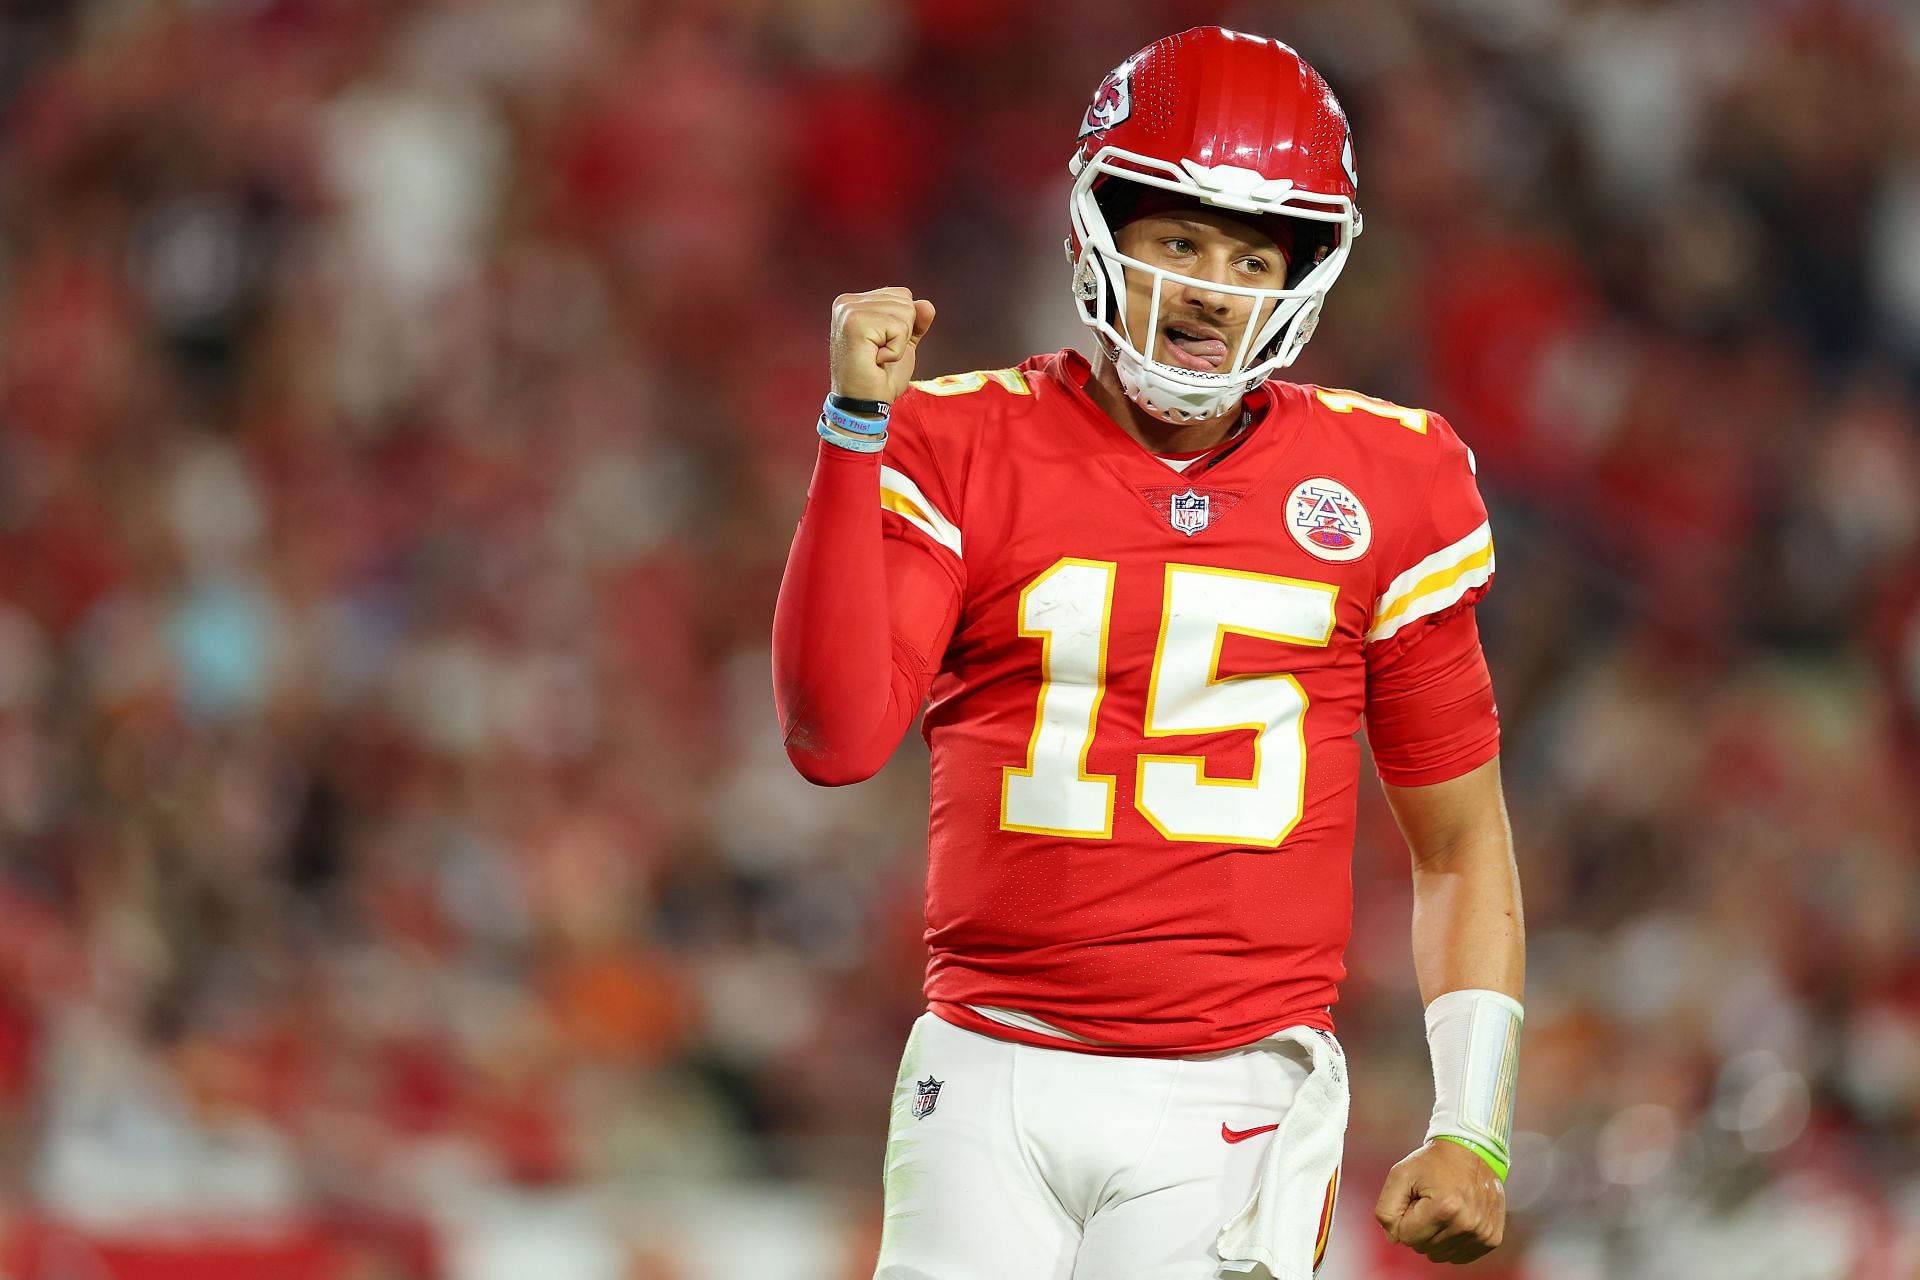 Patrick Mahomes is returning to his unstoppable best